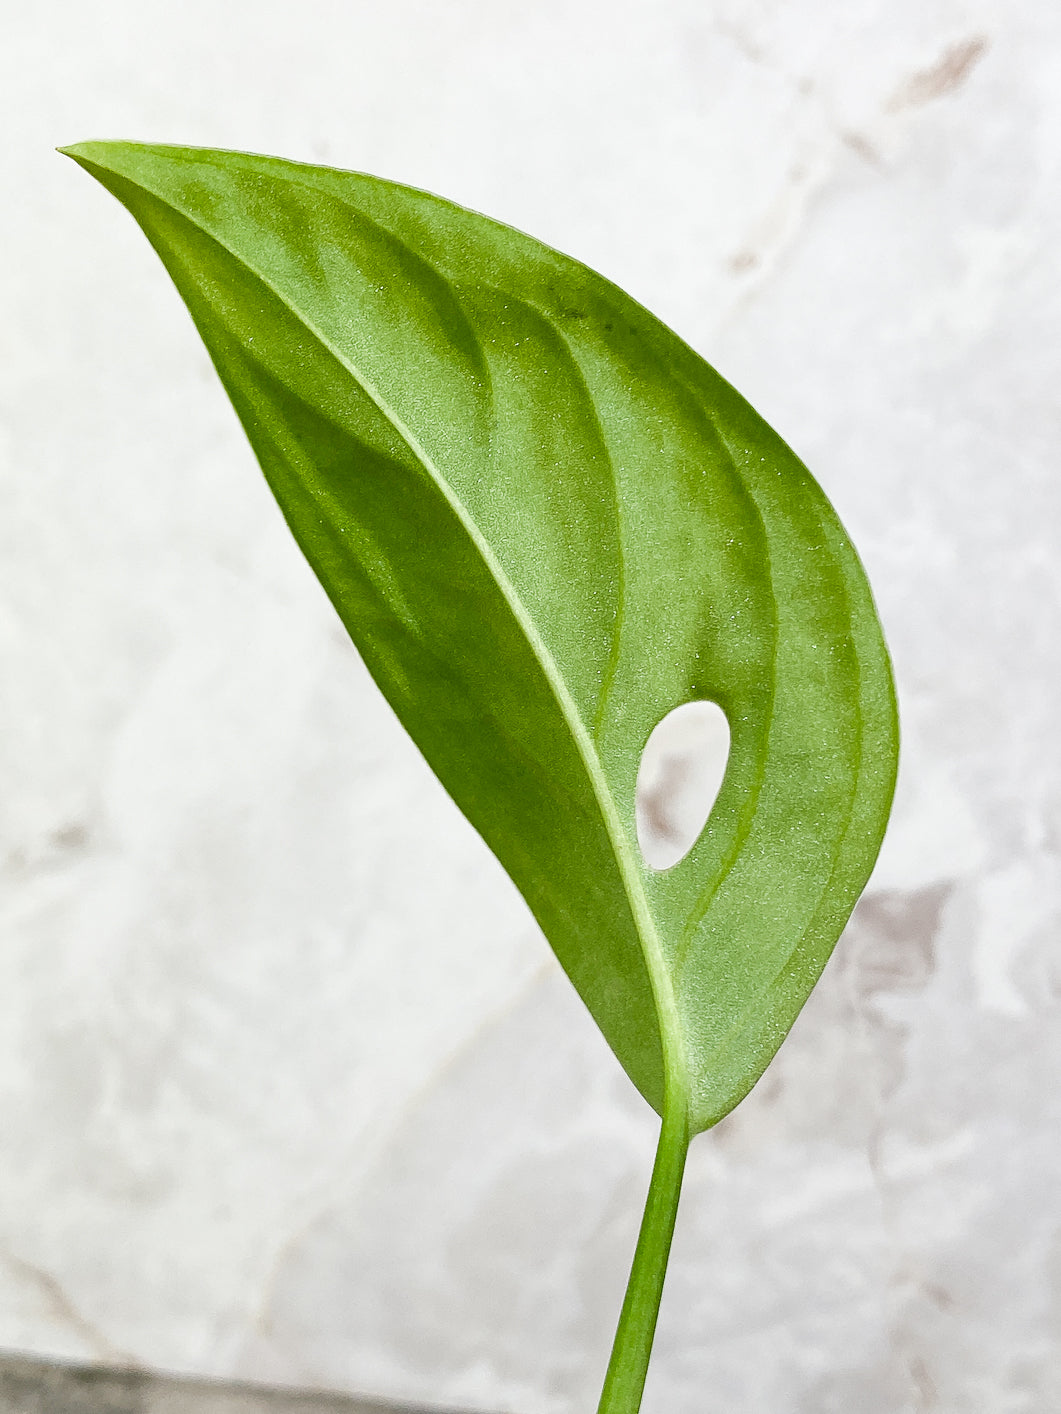 $5 Add-on Deal:  Monstera Esqueleto 1 leaf rooted